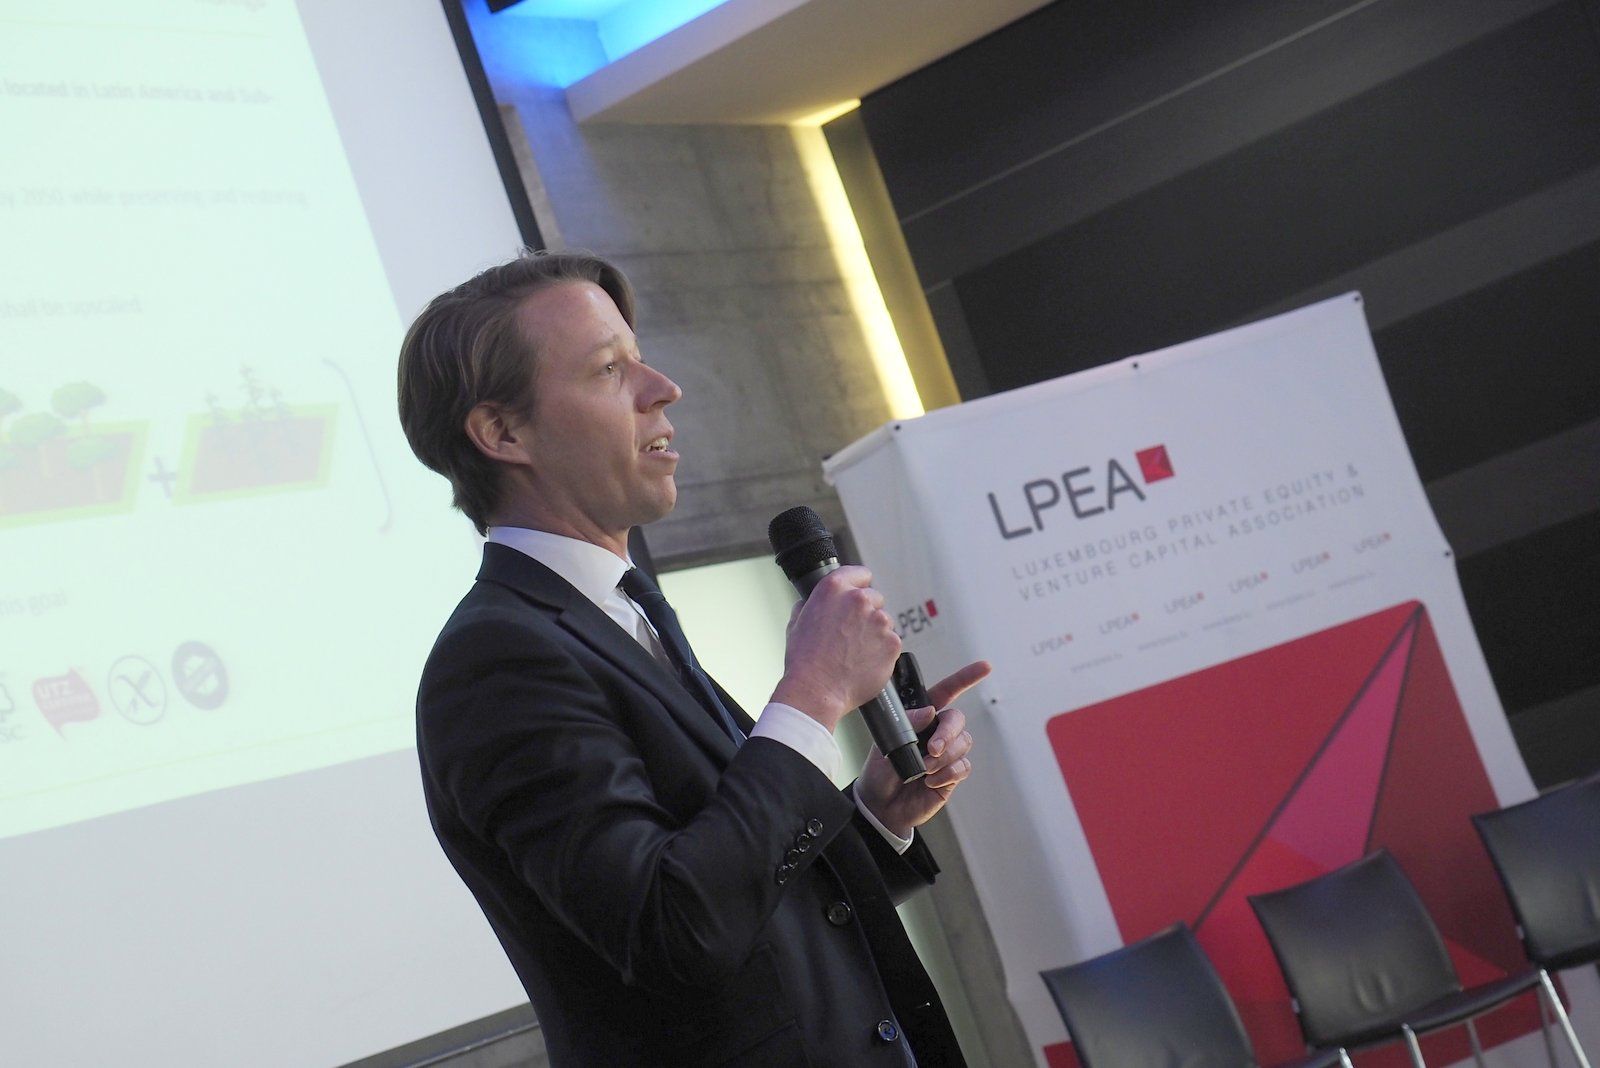 lpea impact investing clement chenost